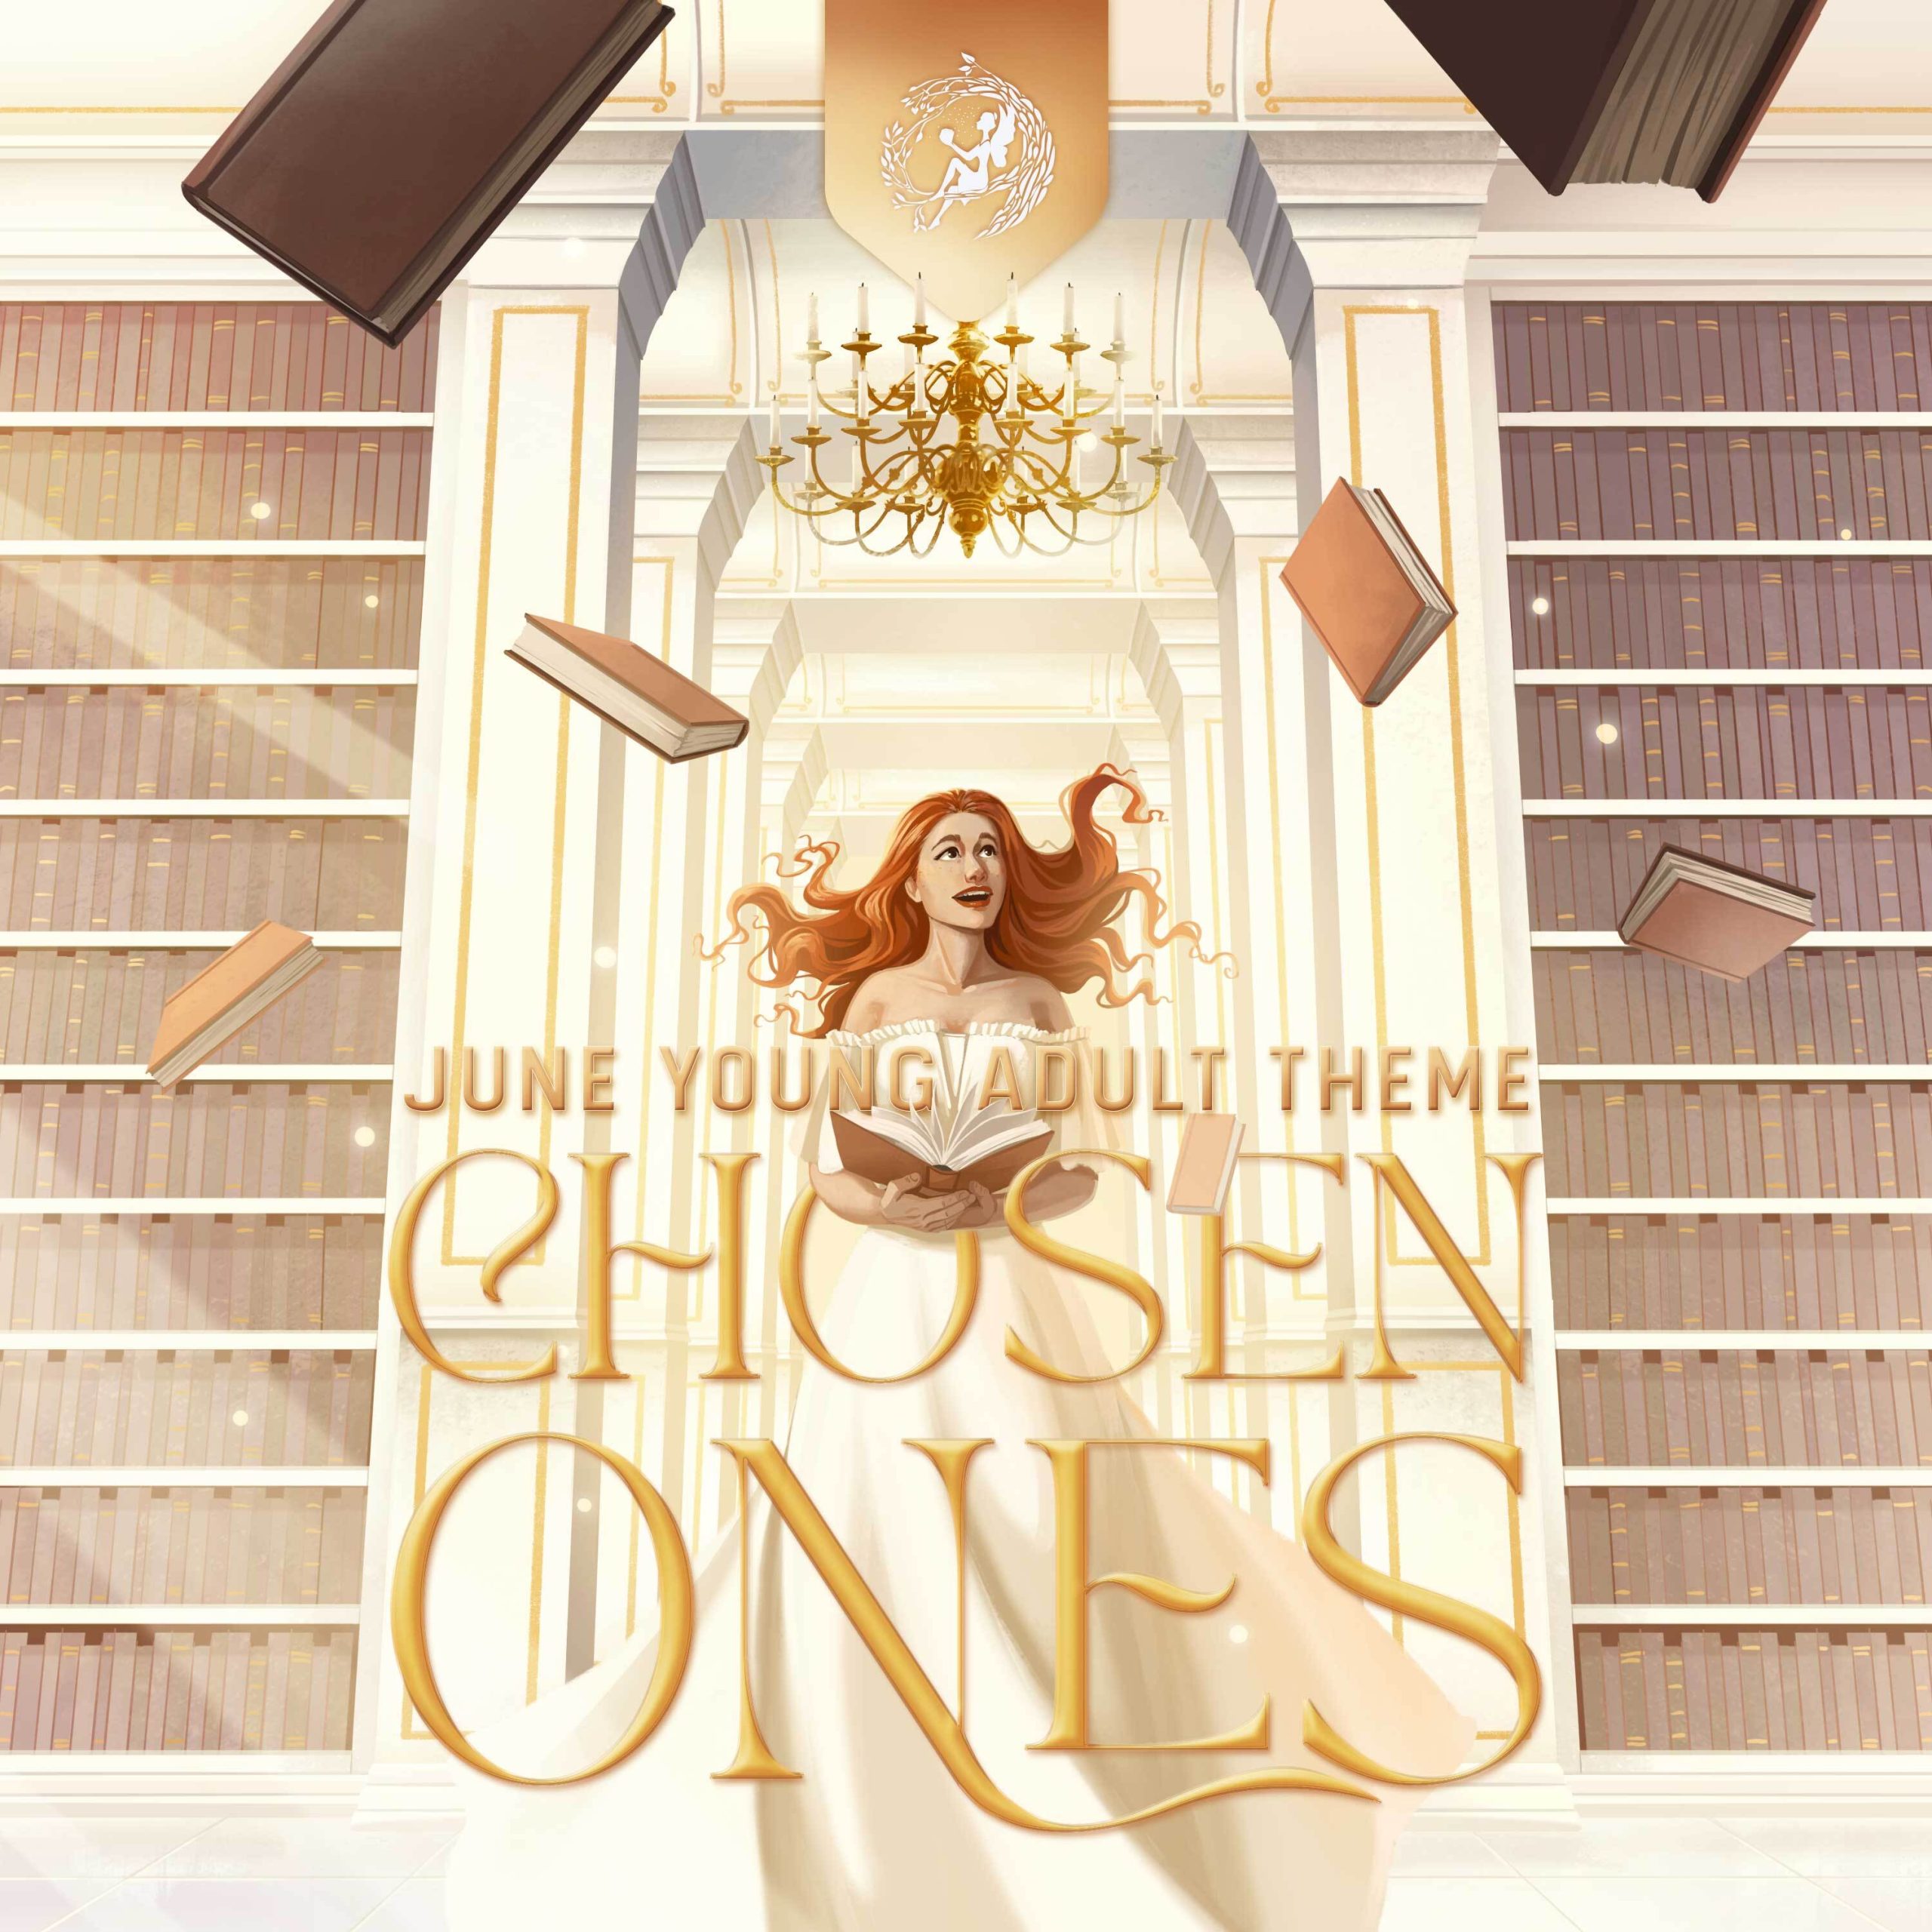 June Young Adult Theme: CHOSEN ONES